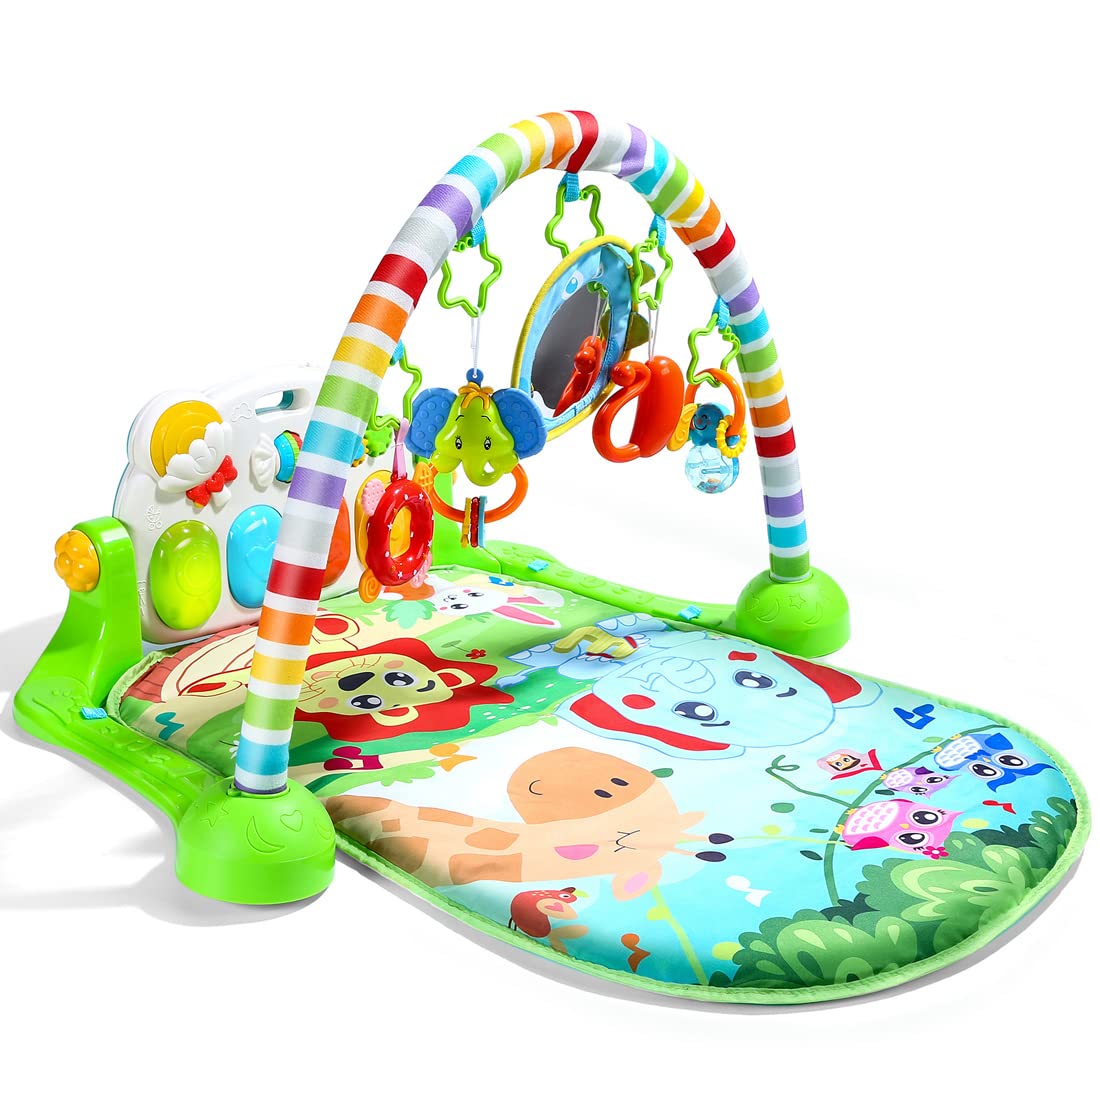 CUTE STONE Baby Gym Play Mat, Play Piano Gym with Tummy Time Activity Mat, Musical Activity Center for Infants Toddlers